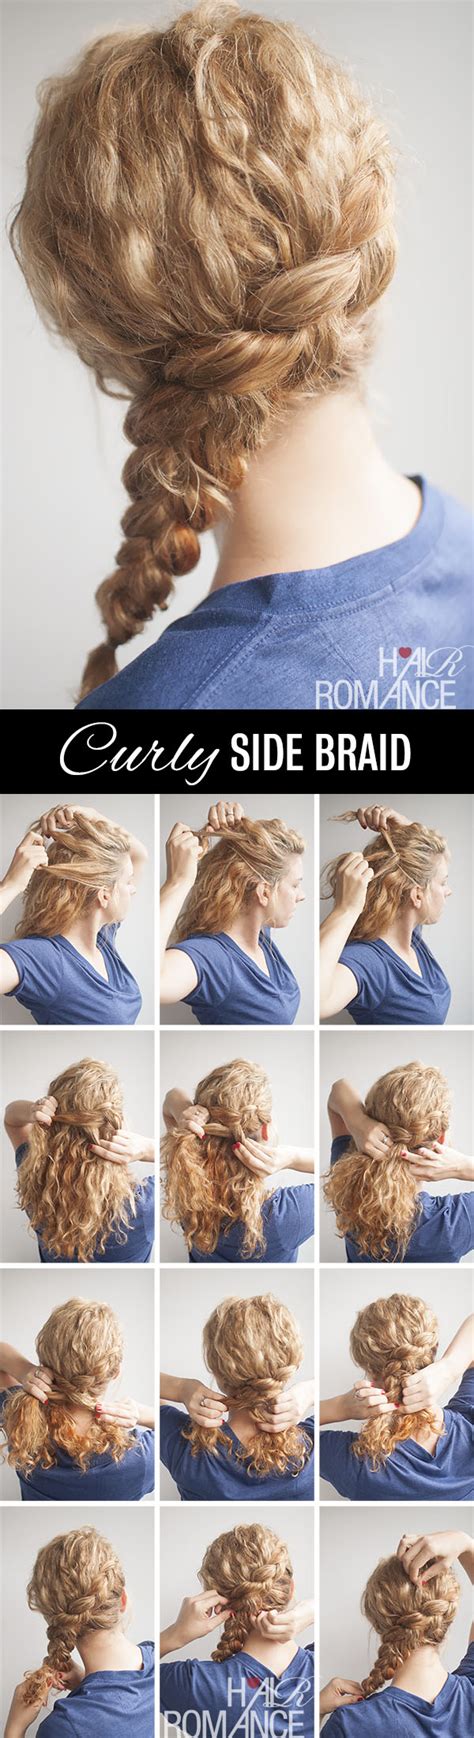 Now now, don't you worry. Curly side braid hairstyle tutorial - Hair Romance